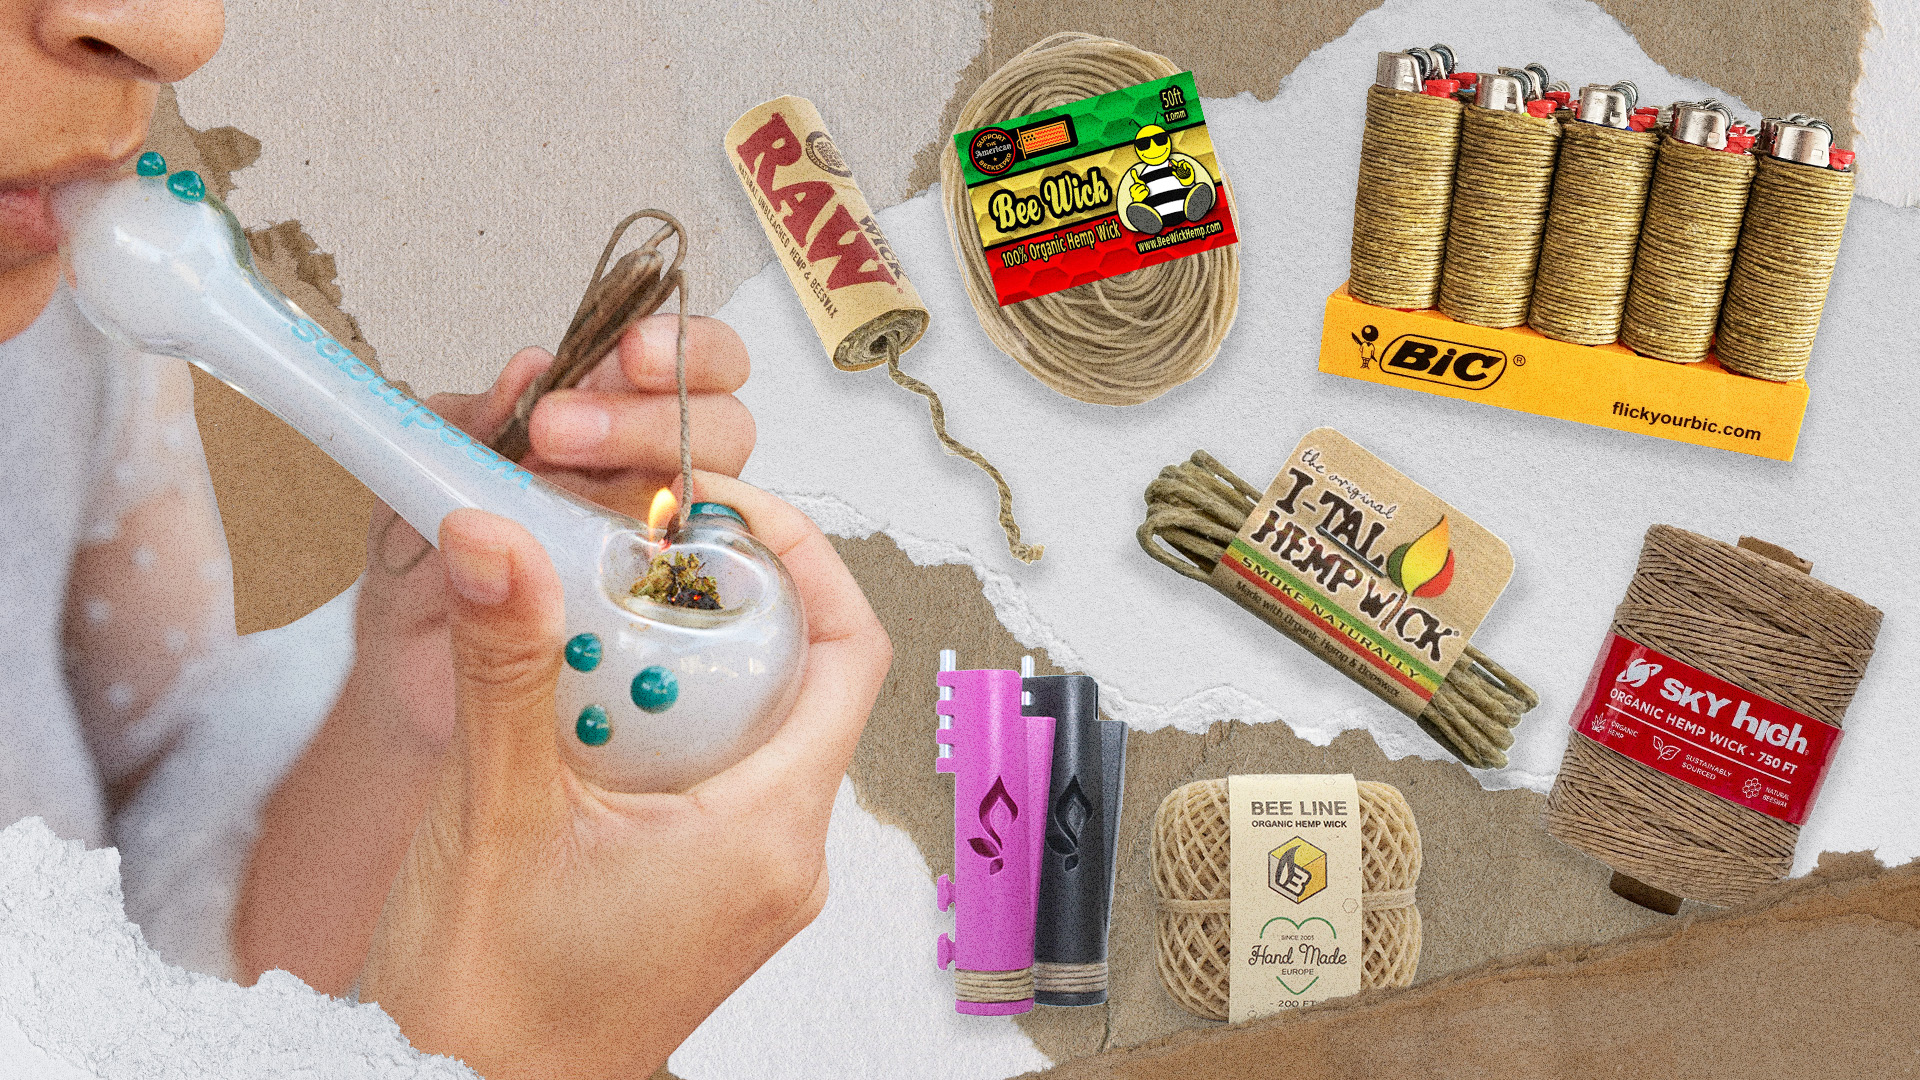 How To Use Hemp Wick: Step-by-Step Guide (With Pictures)